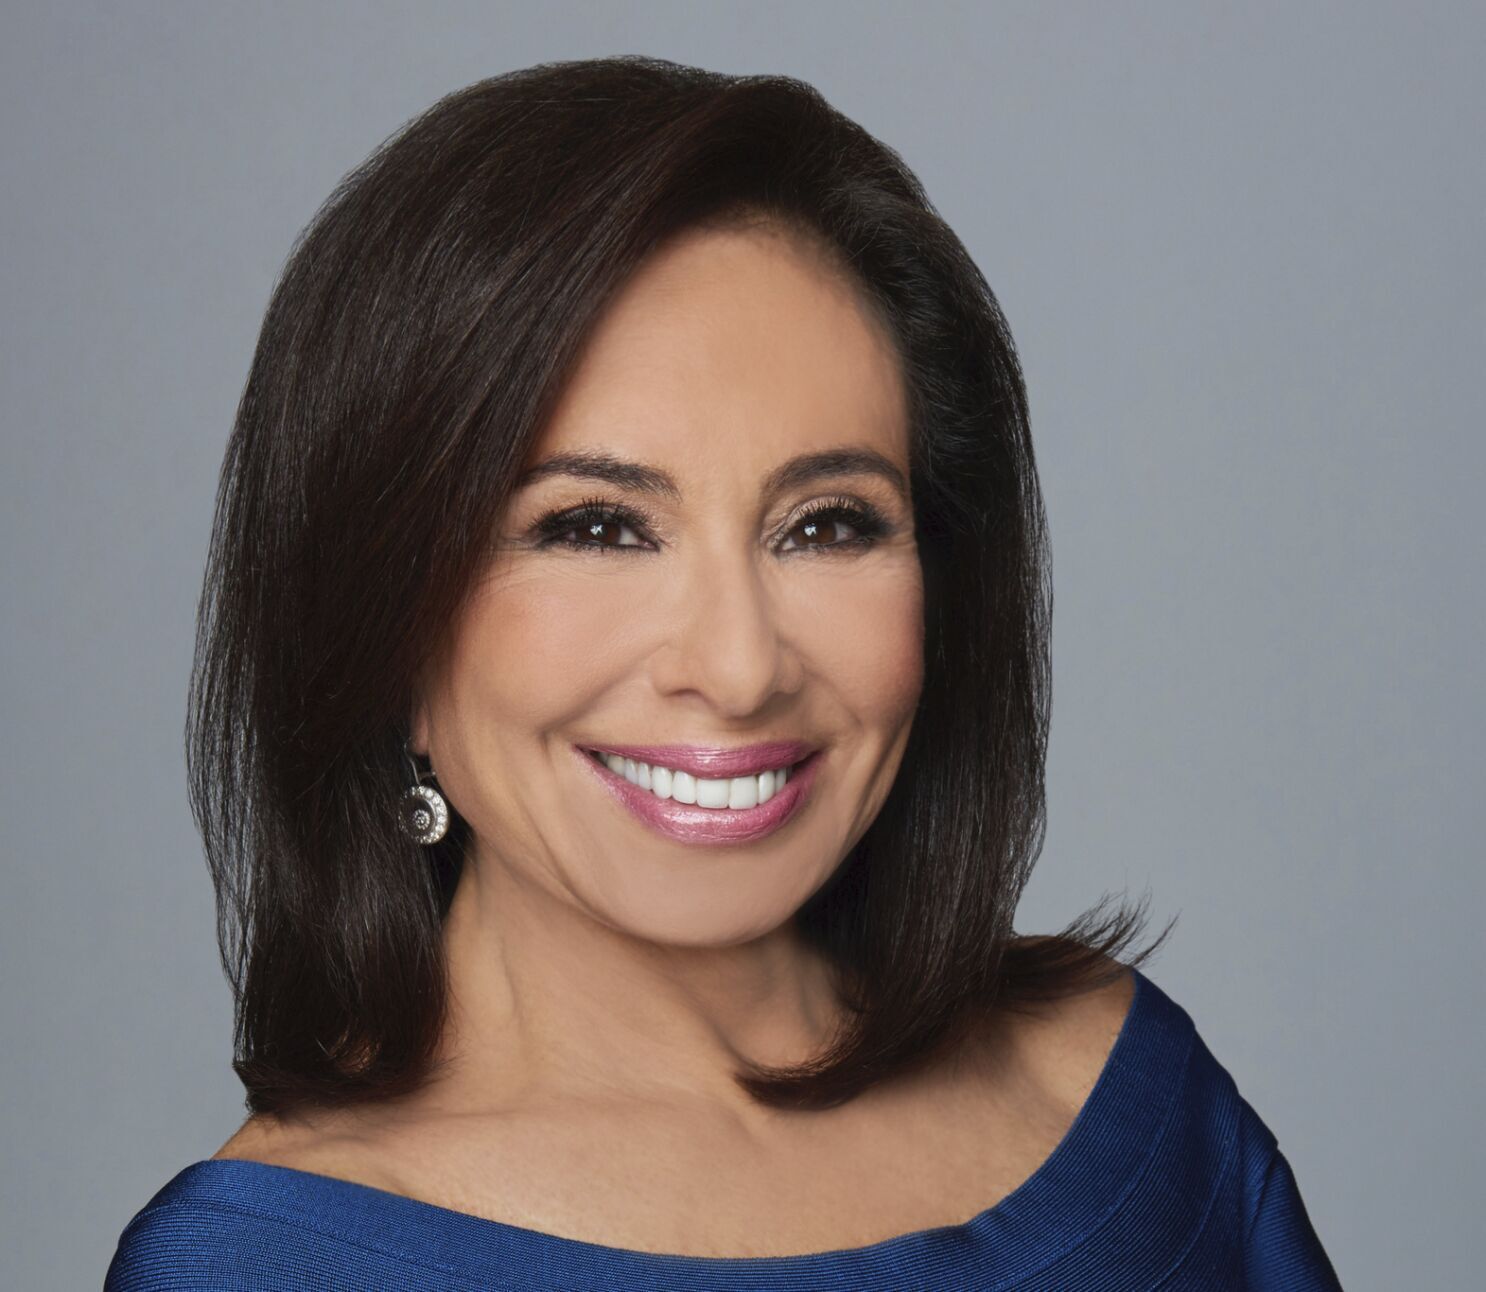 Judge Jeanine Left Eye Disease - What Is The Truth?